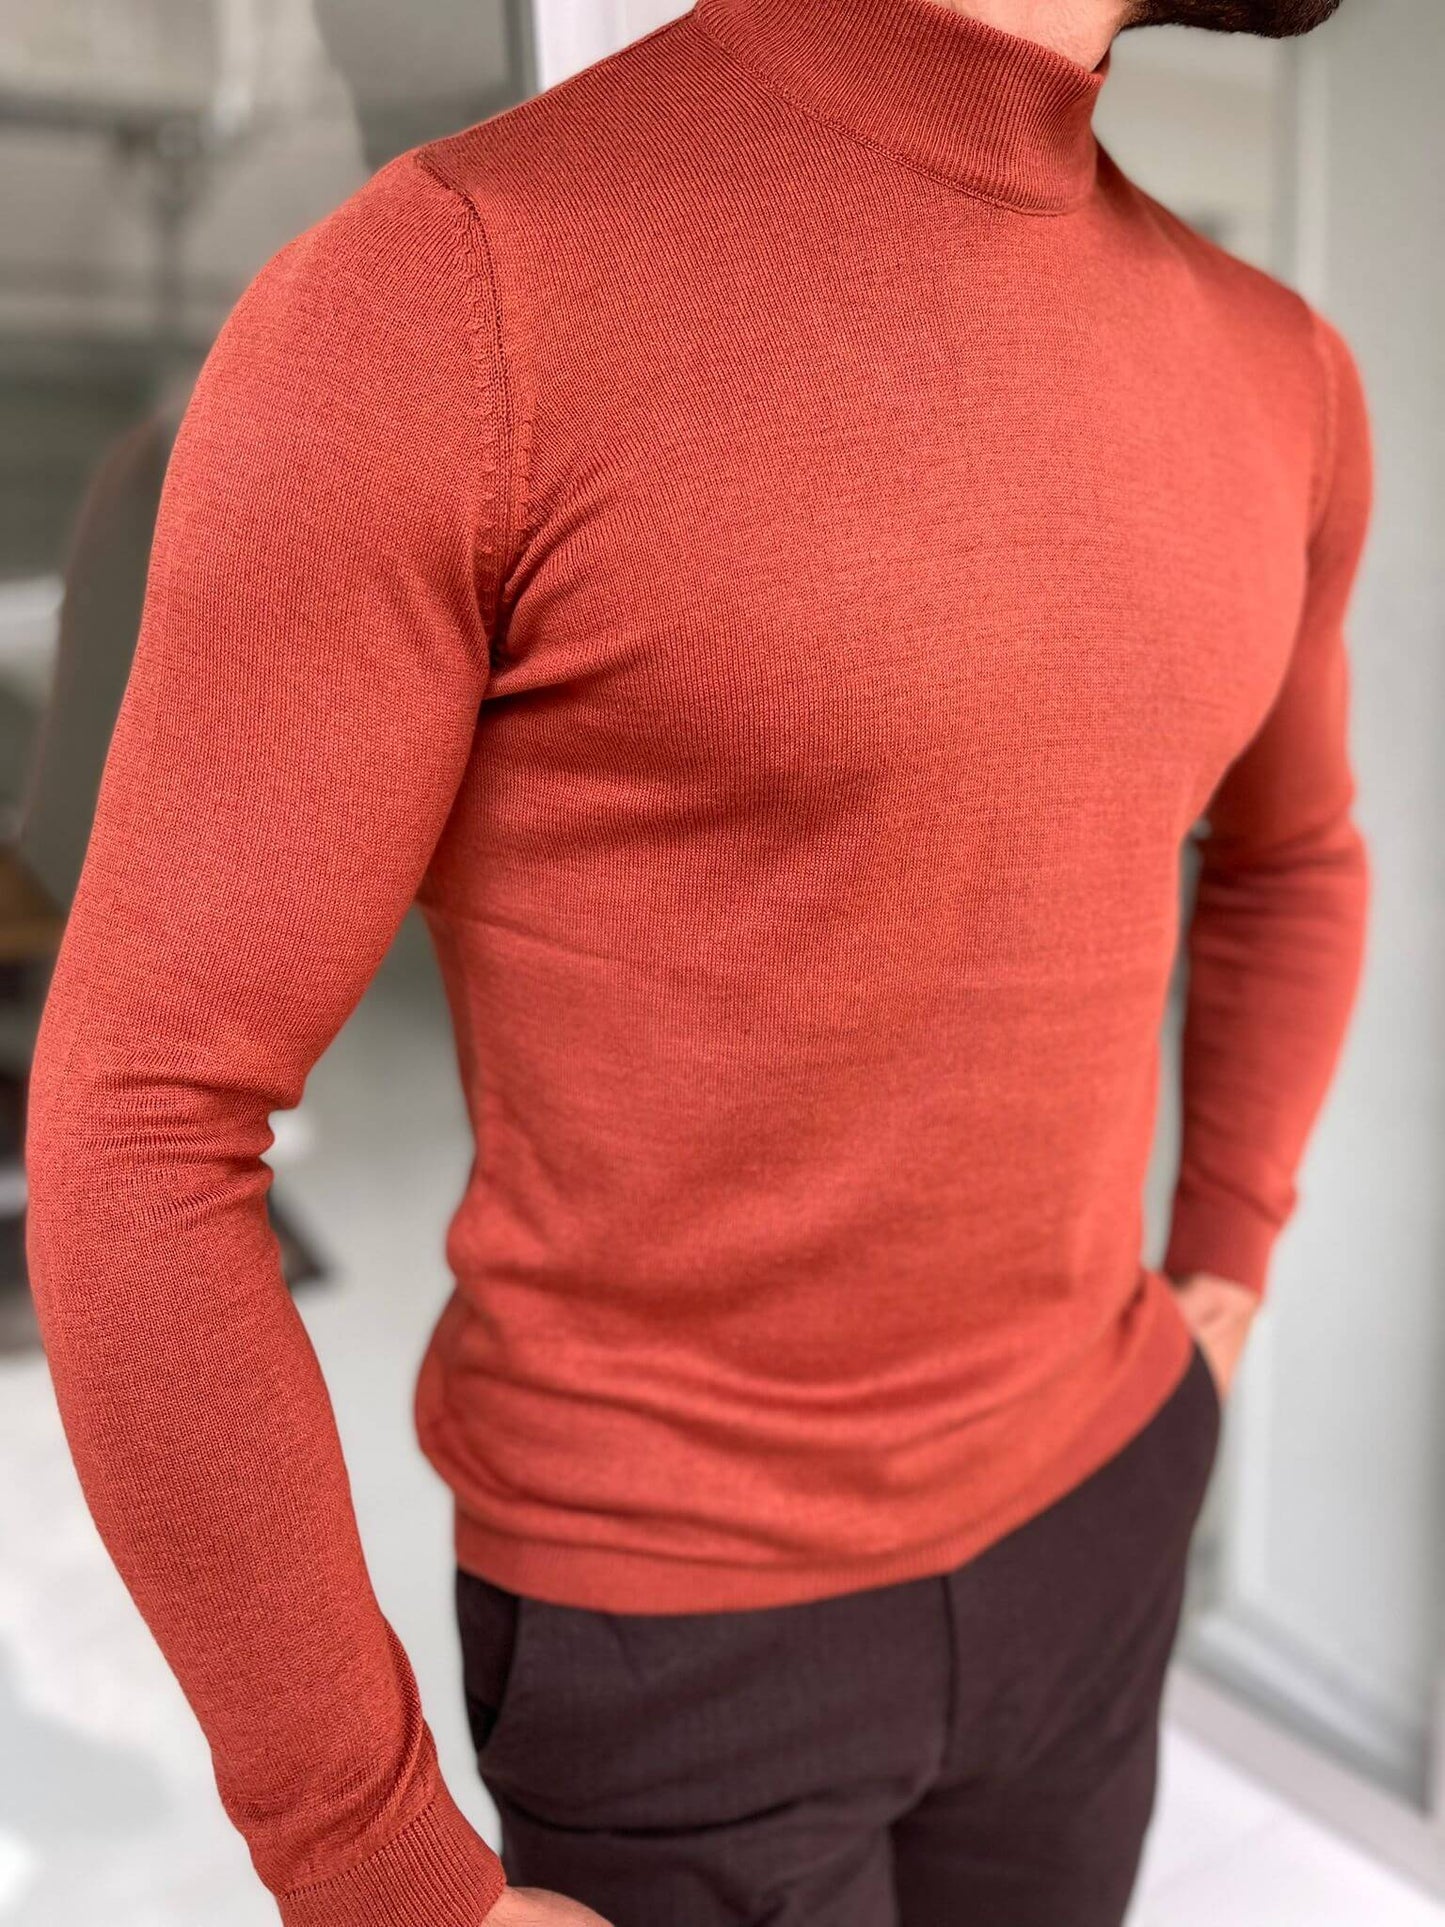 A Hollo Tile Turtlrneck sweater has a high neckline and is made from a soft, textured fabric, providing both warmth and a fashionable look."